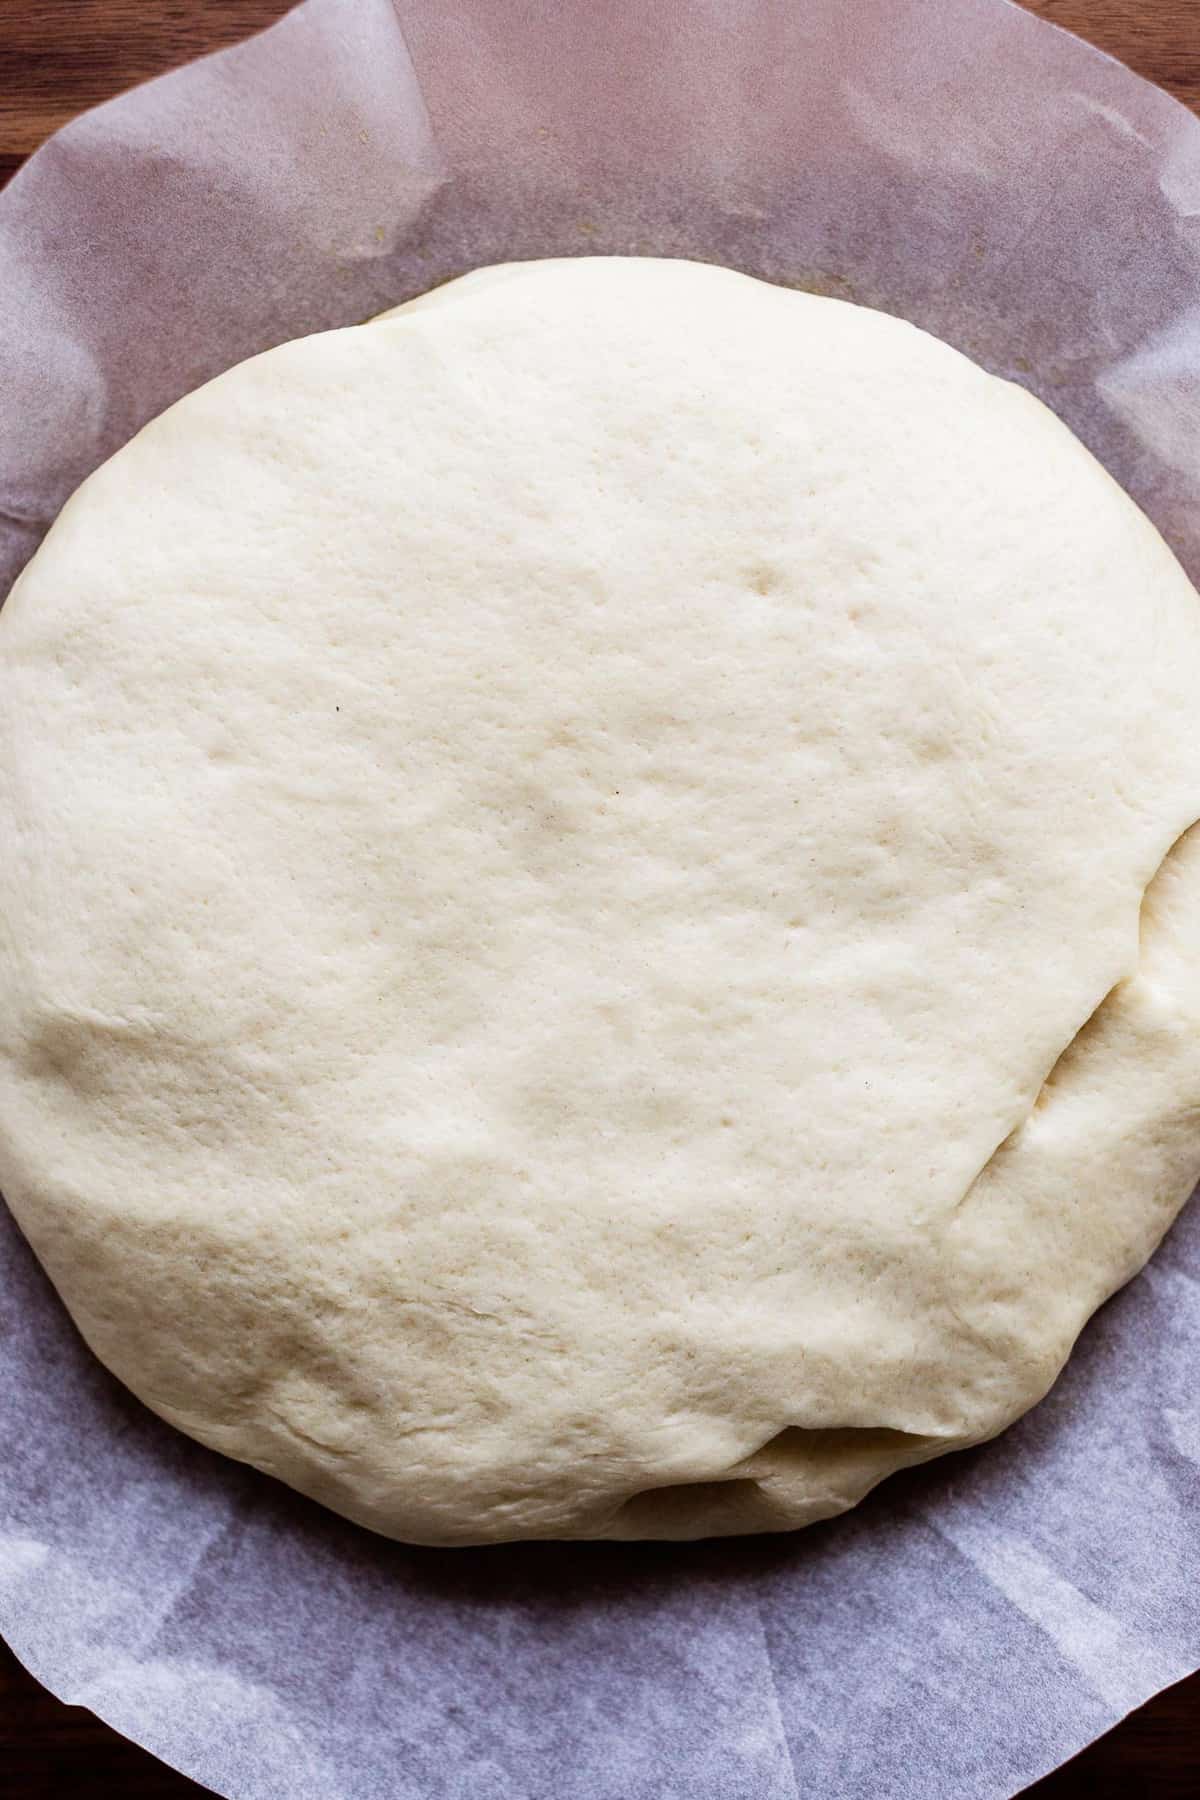 Risen focaccia dough on parchment paper, ready to be dimpled.